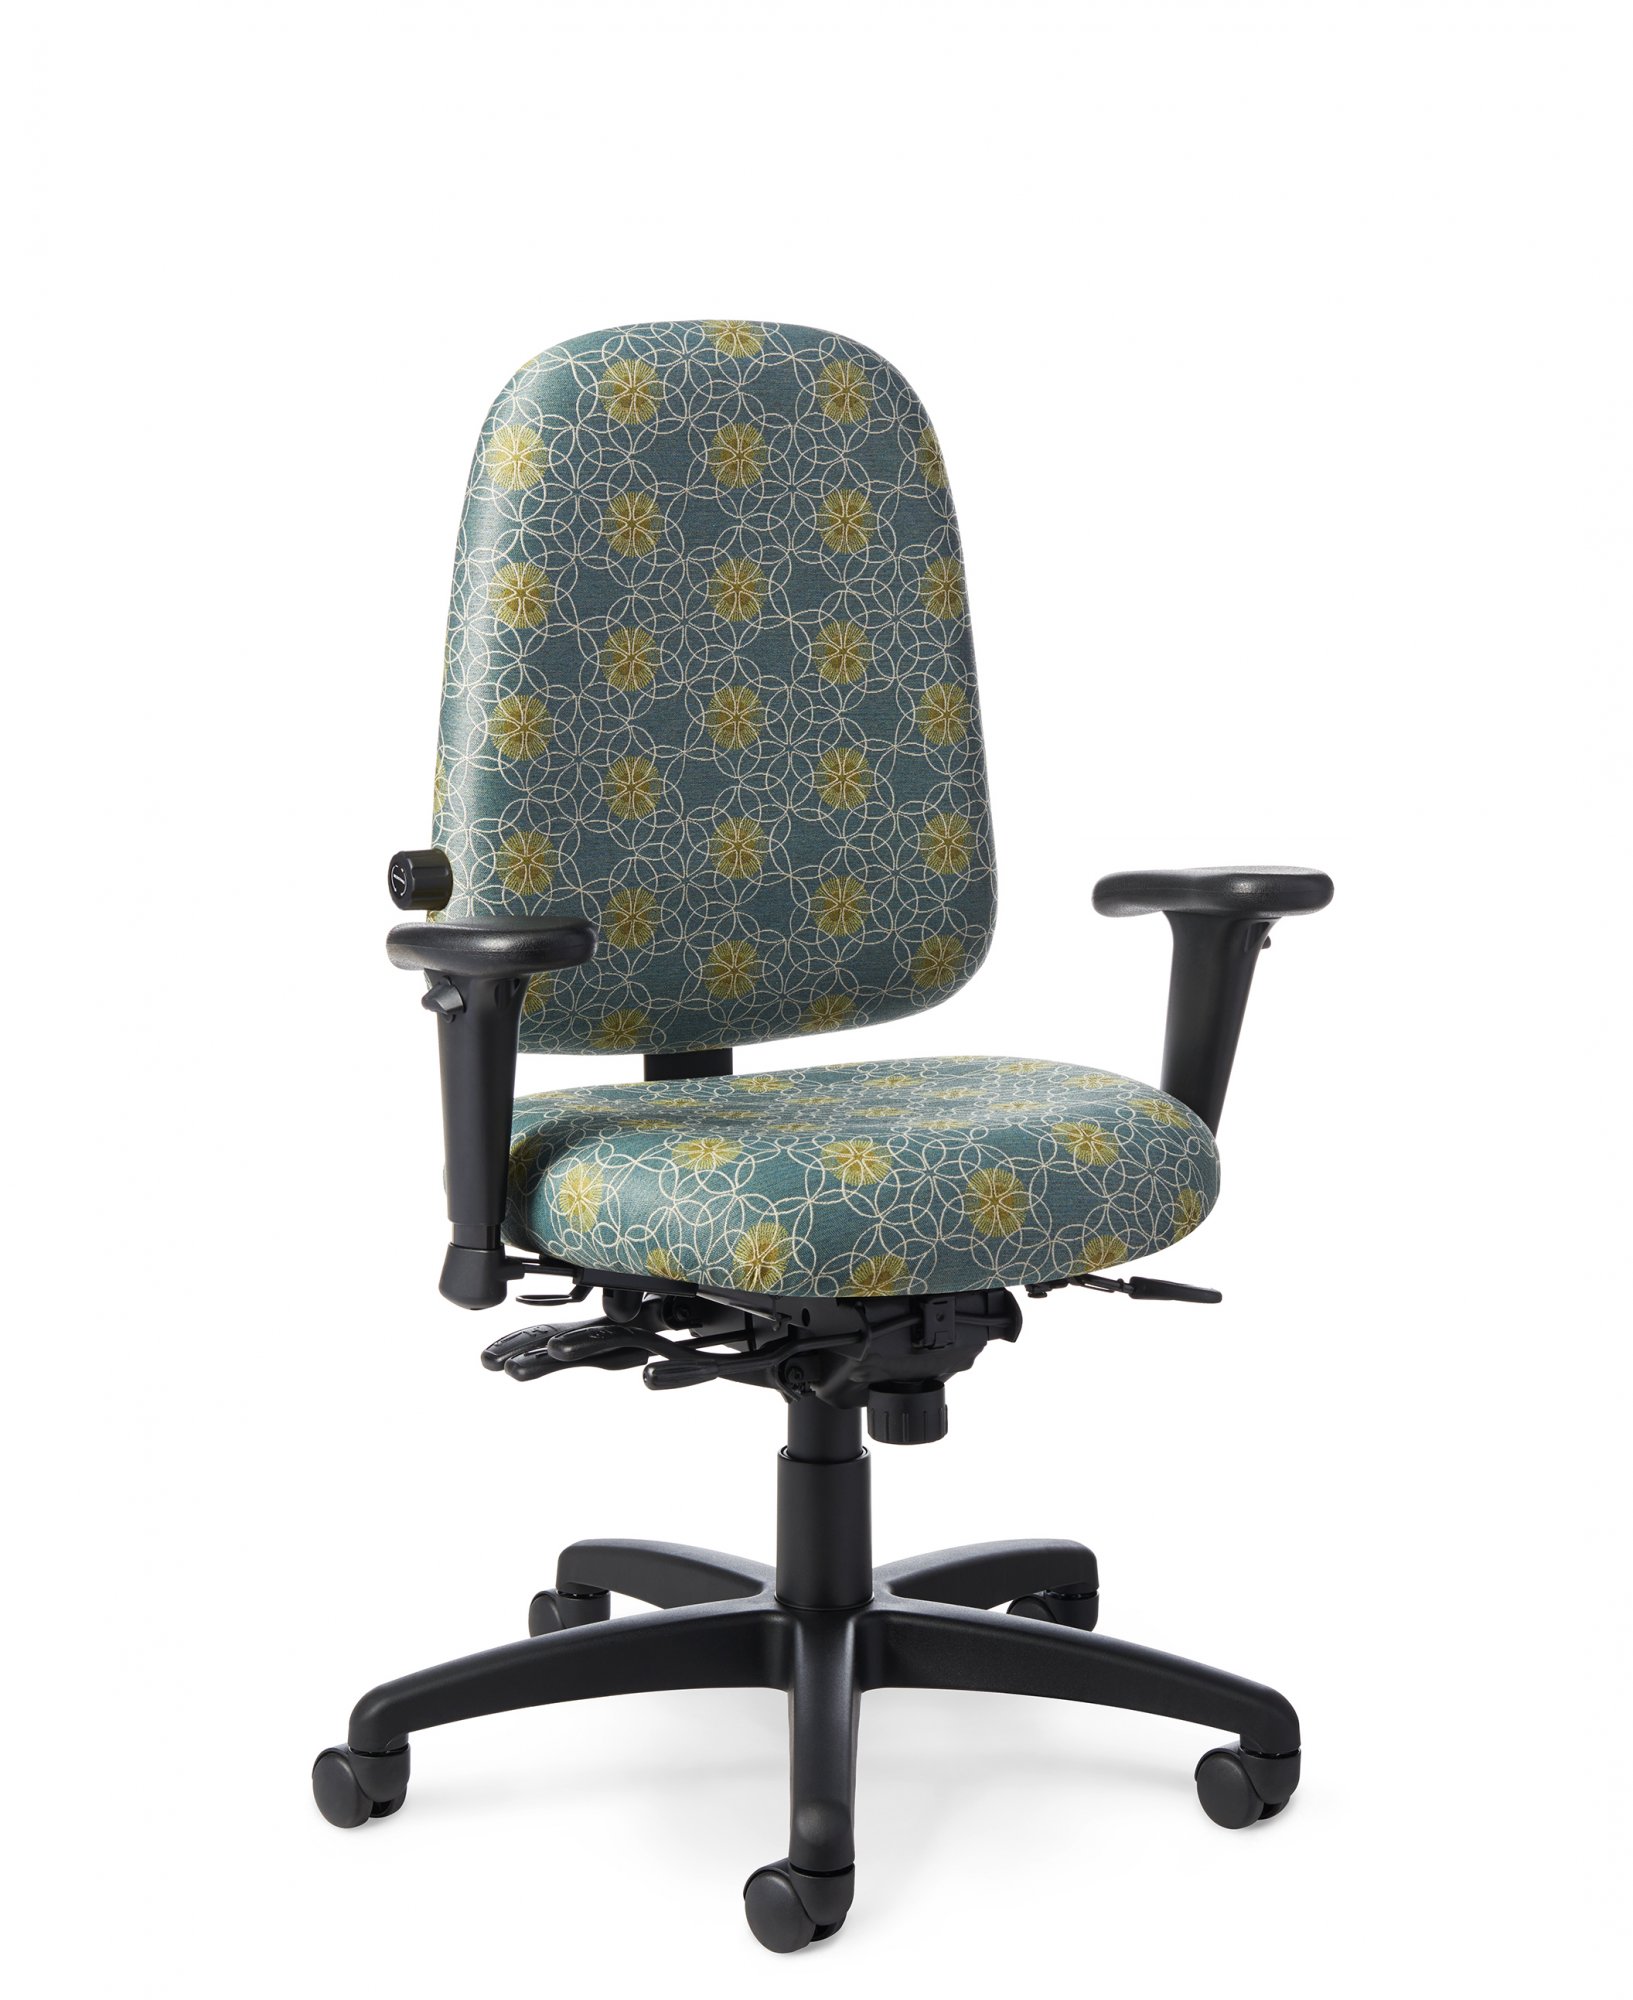 Office Master 7780 (OM Seating) Paramount Value Cross Performance Executive Chair